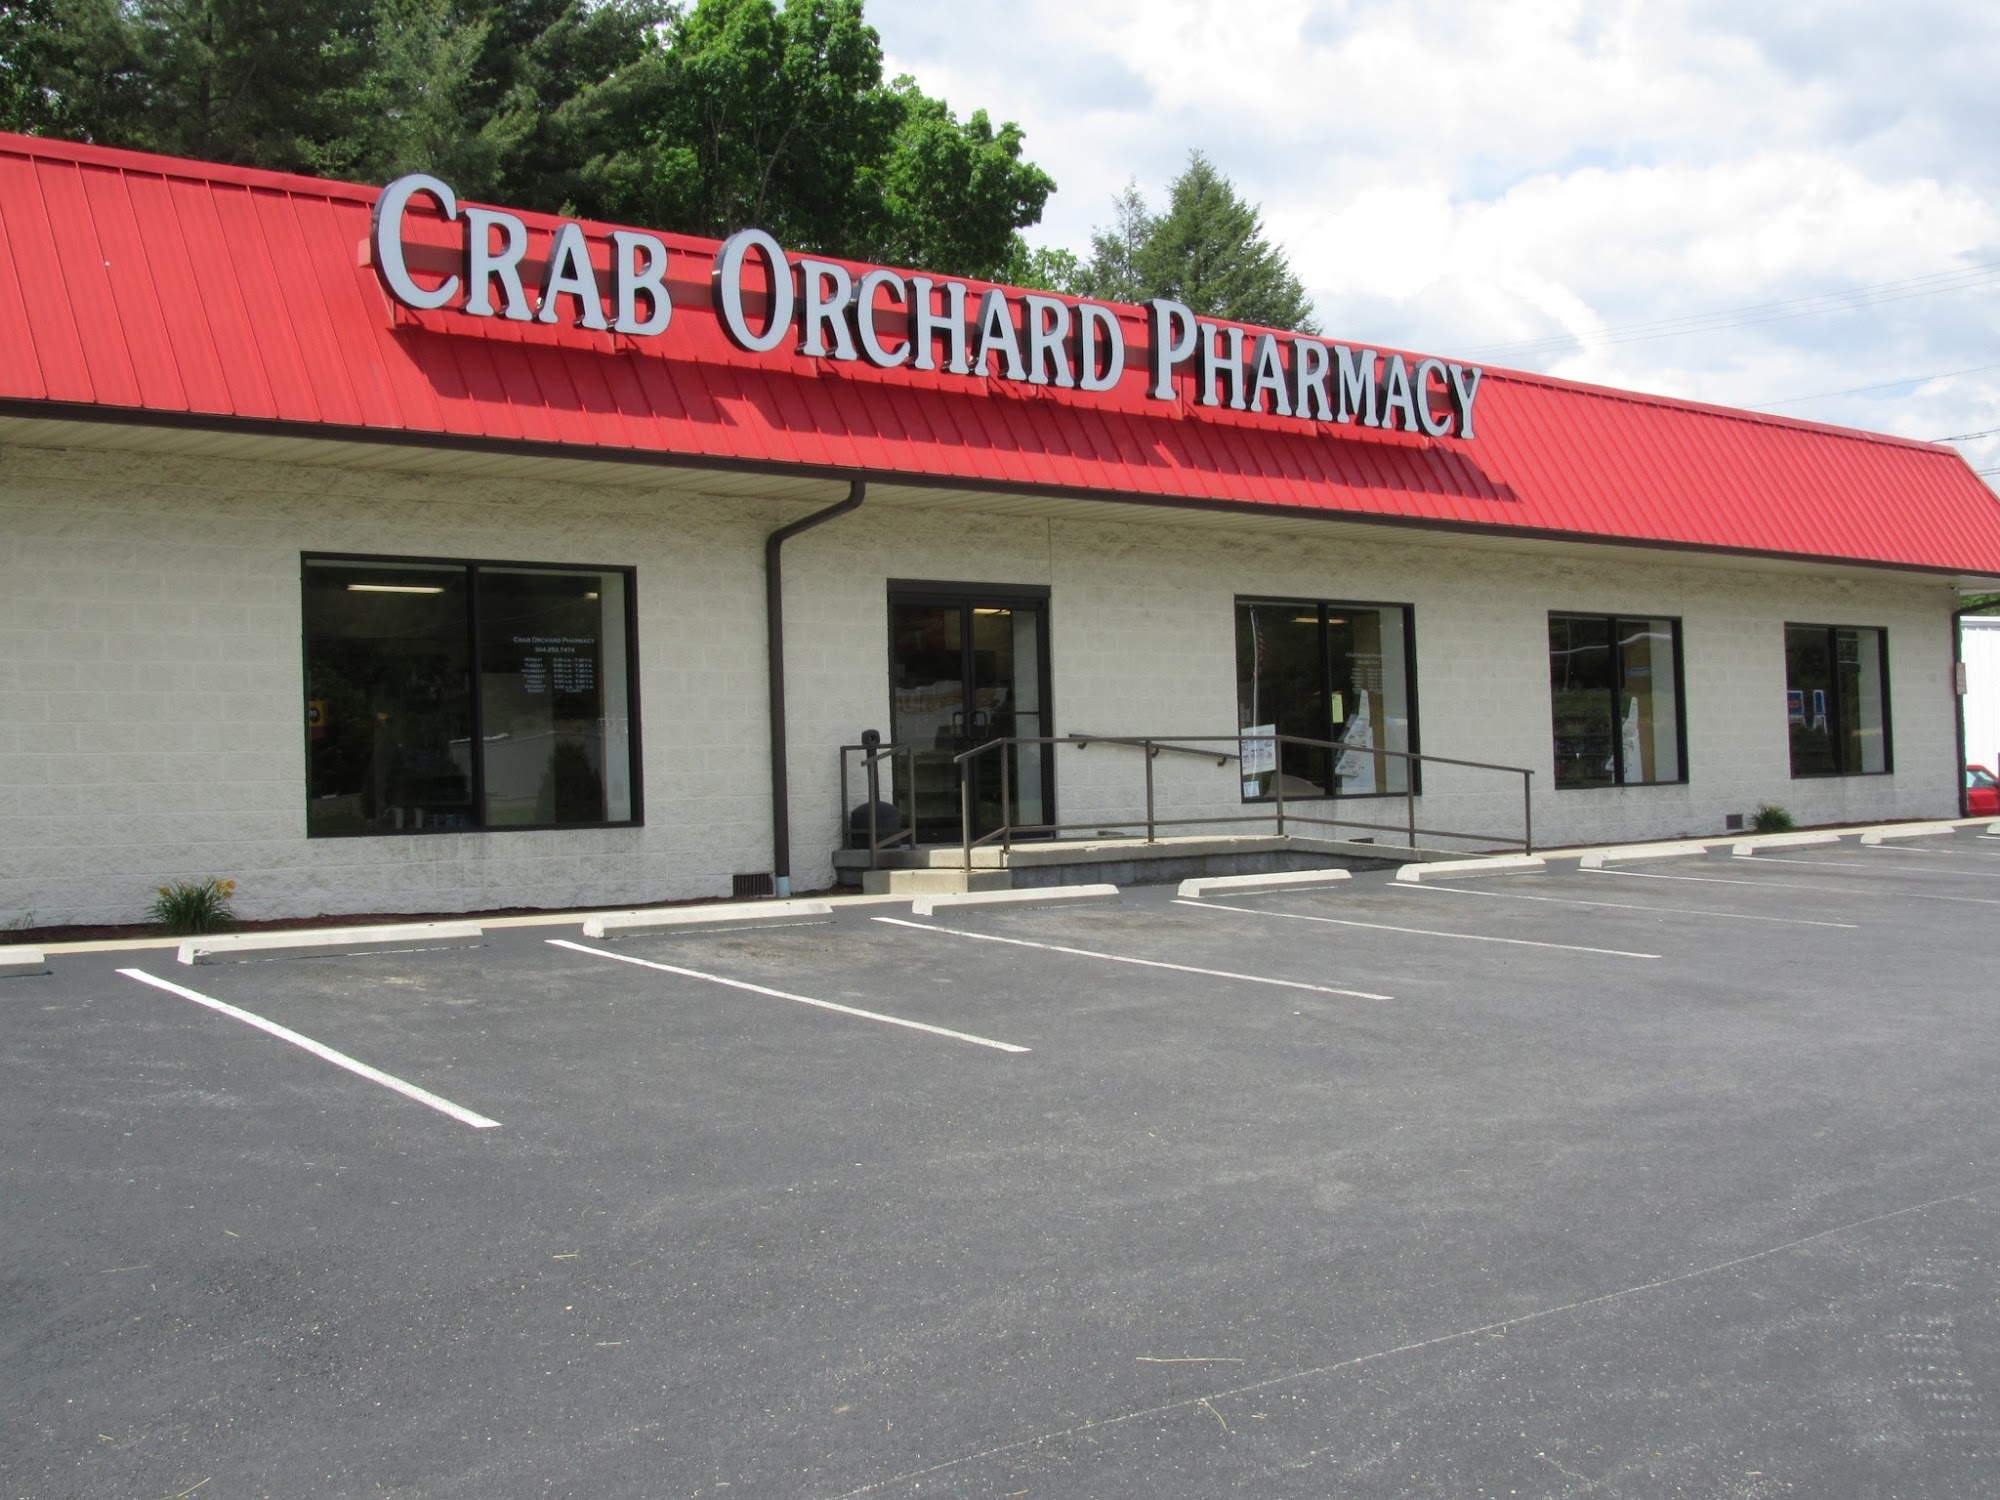 Crab Orchard Pharmacy